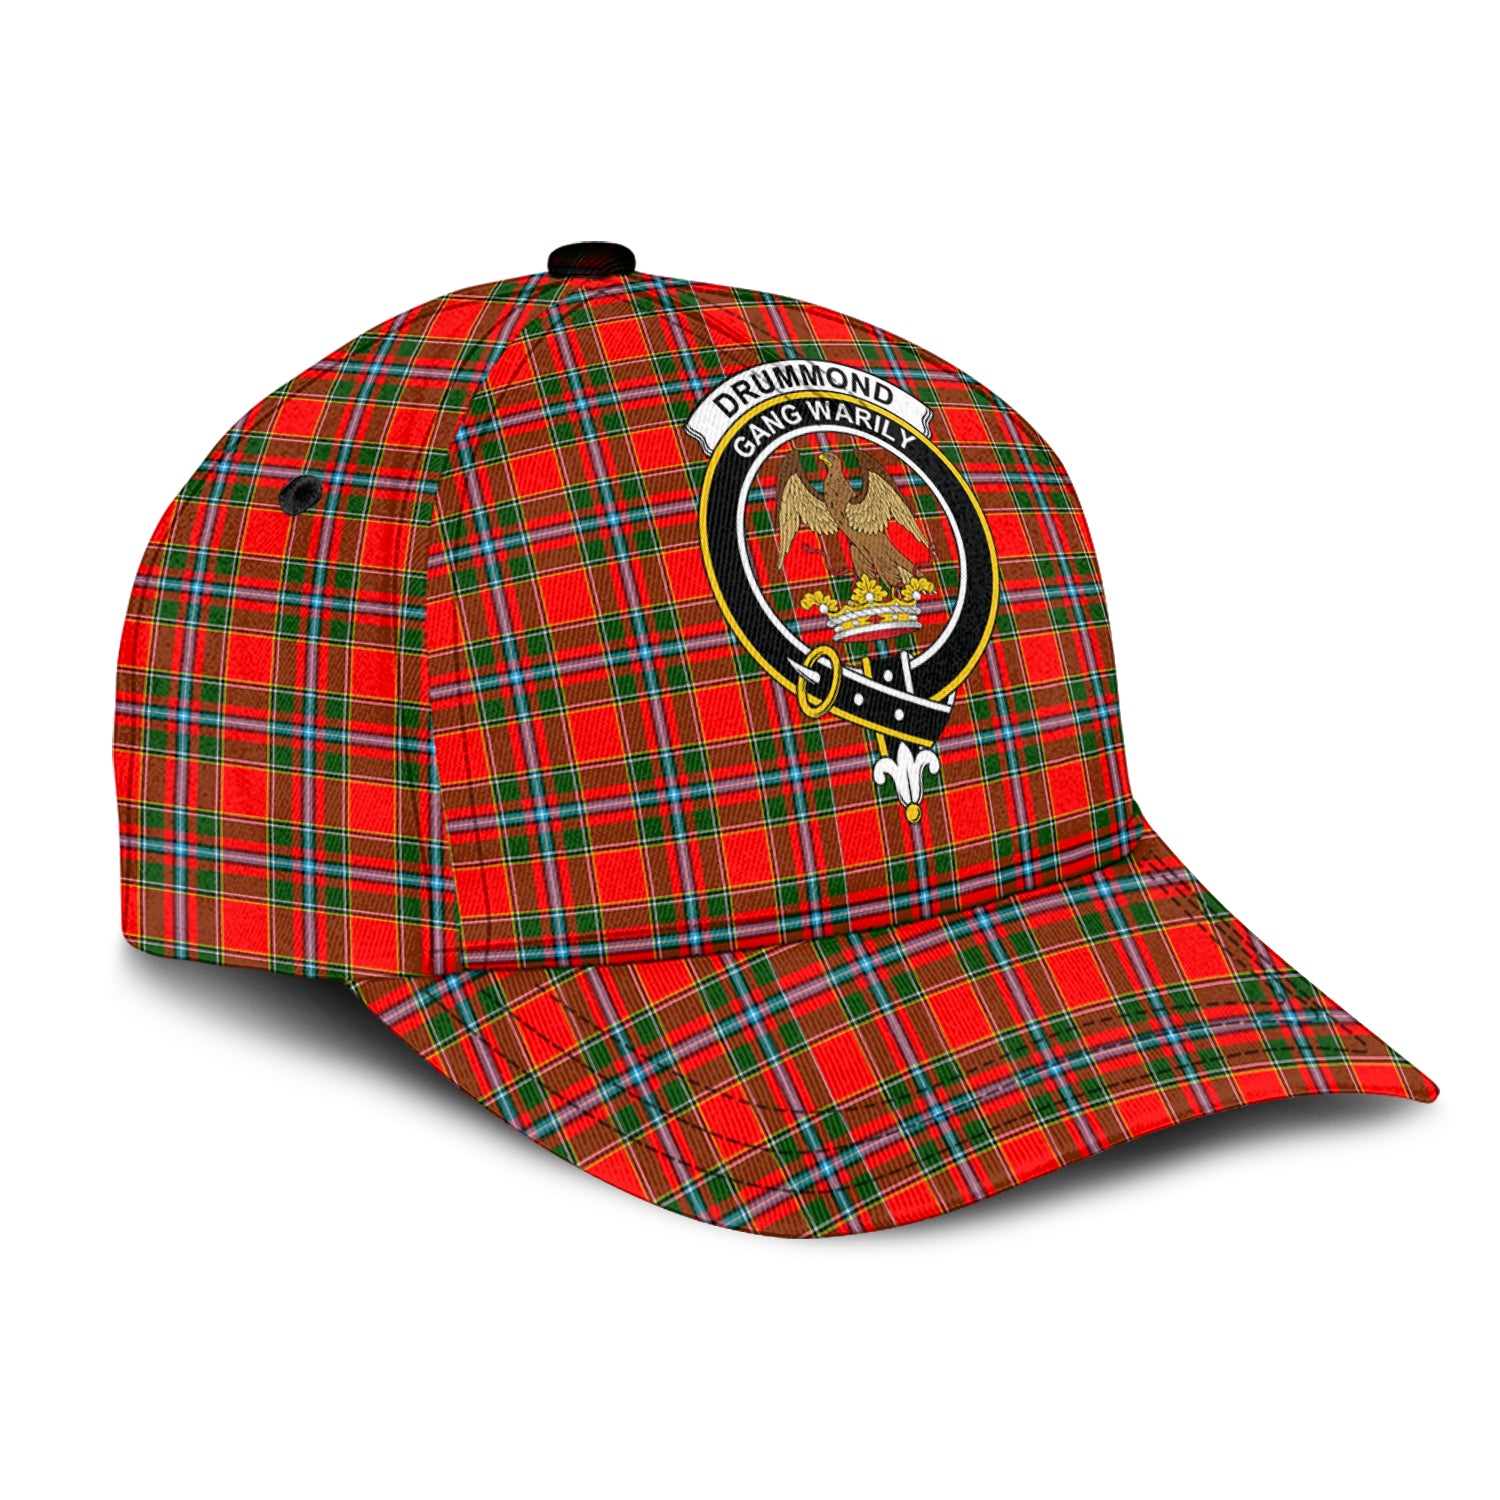 drummond-of-perth-tartan-classic-cap-with-family-crest